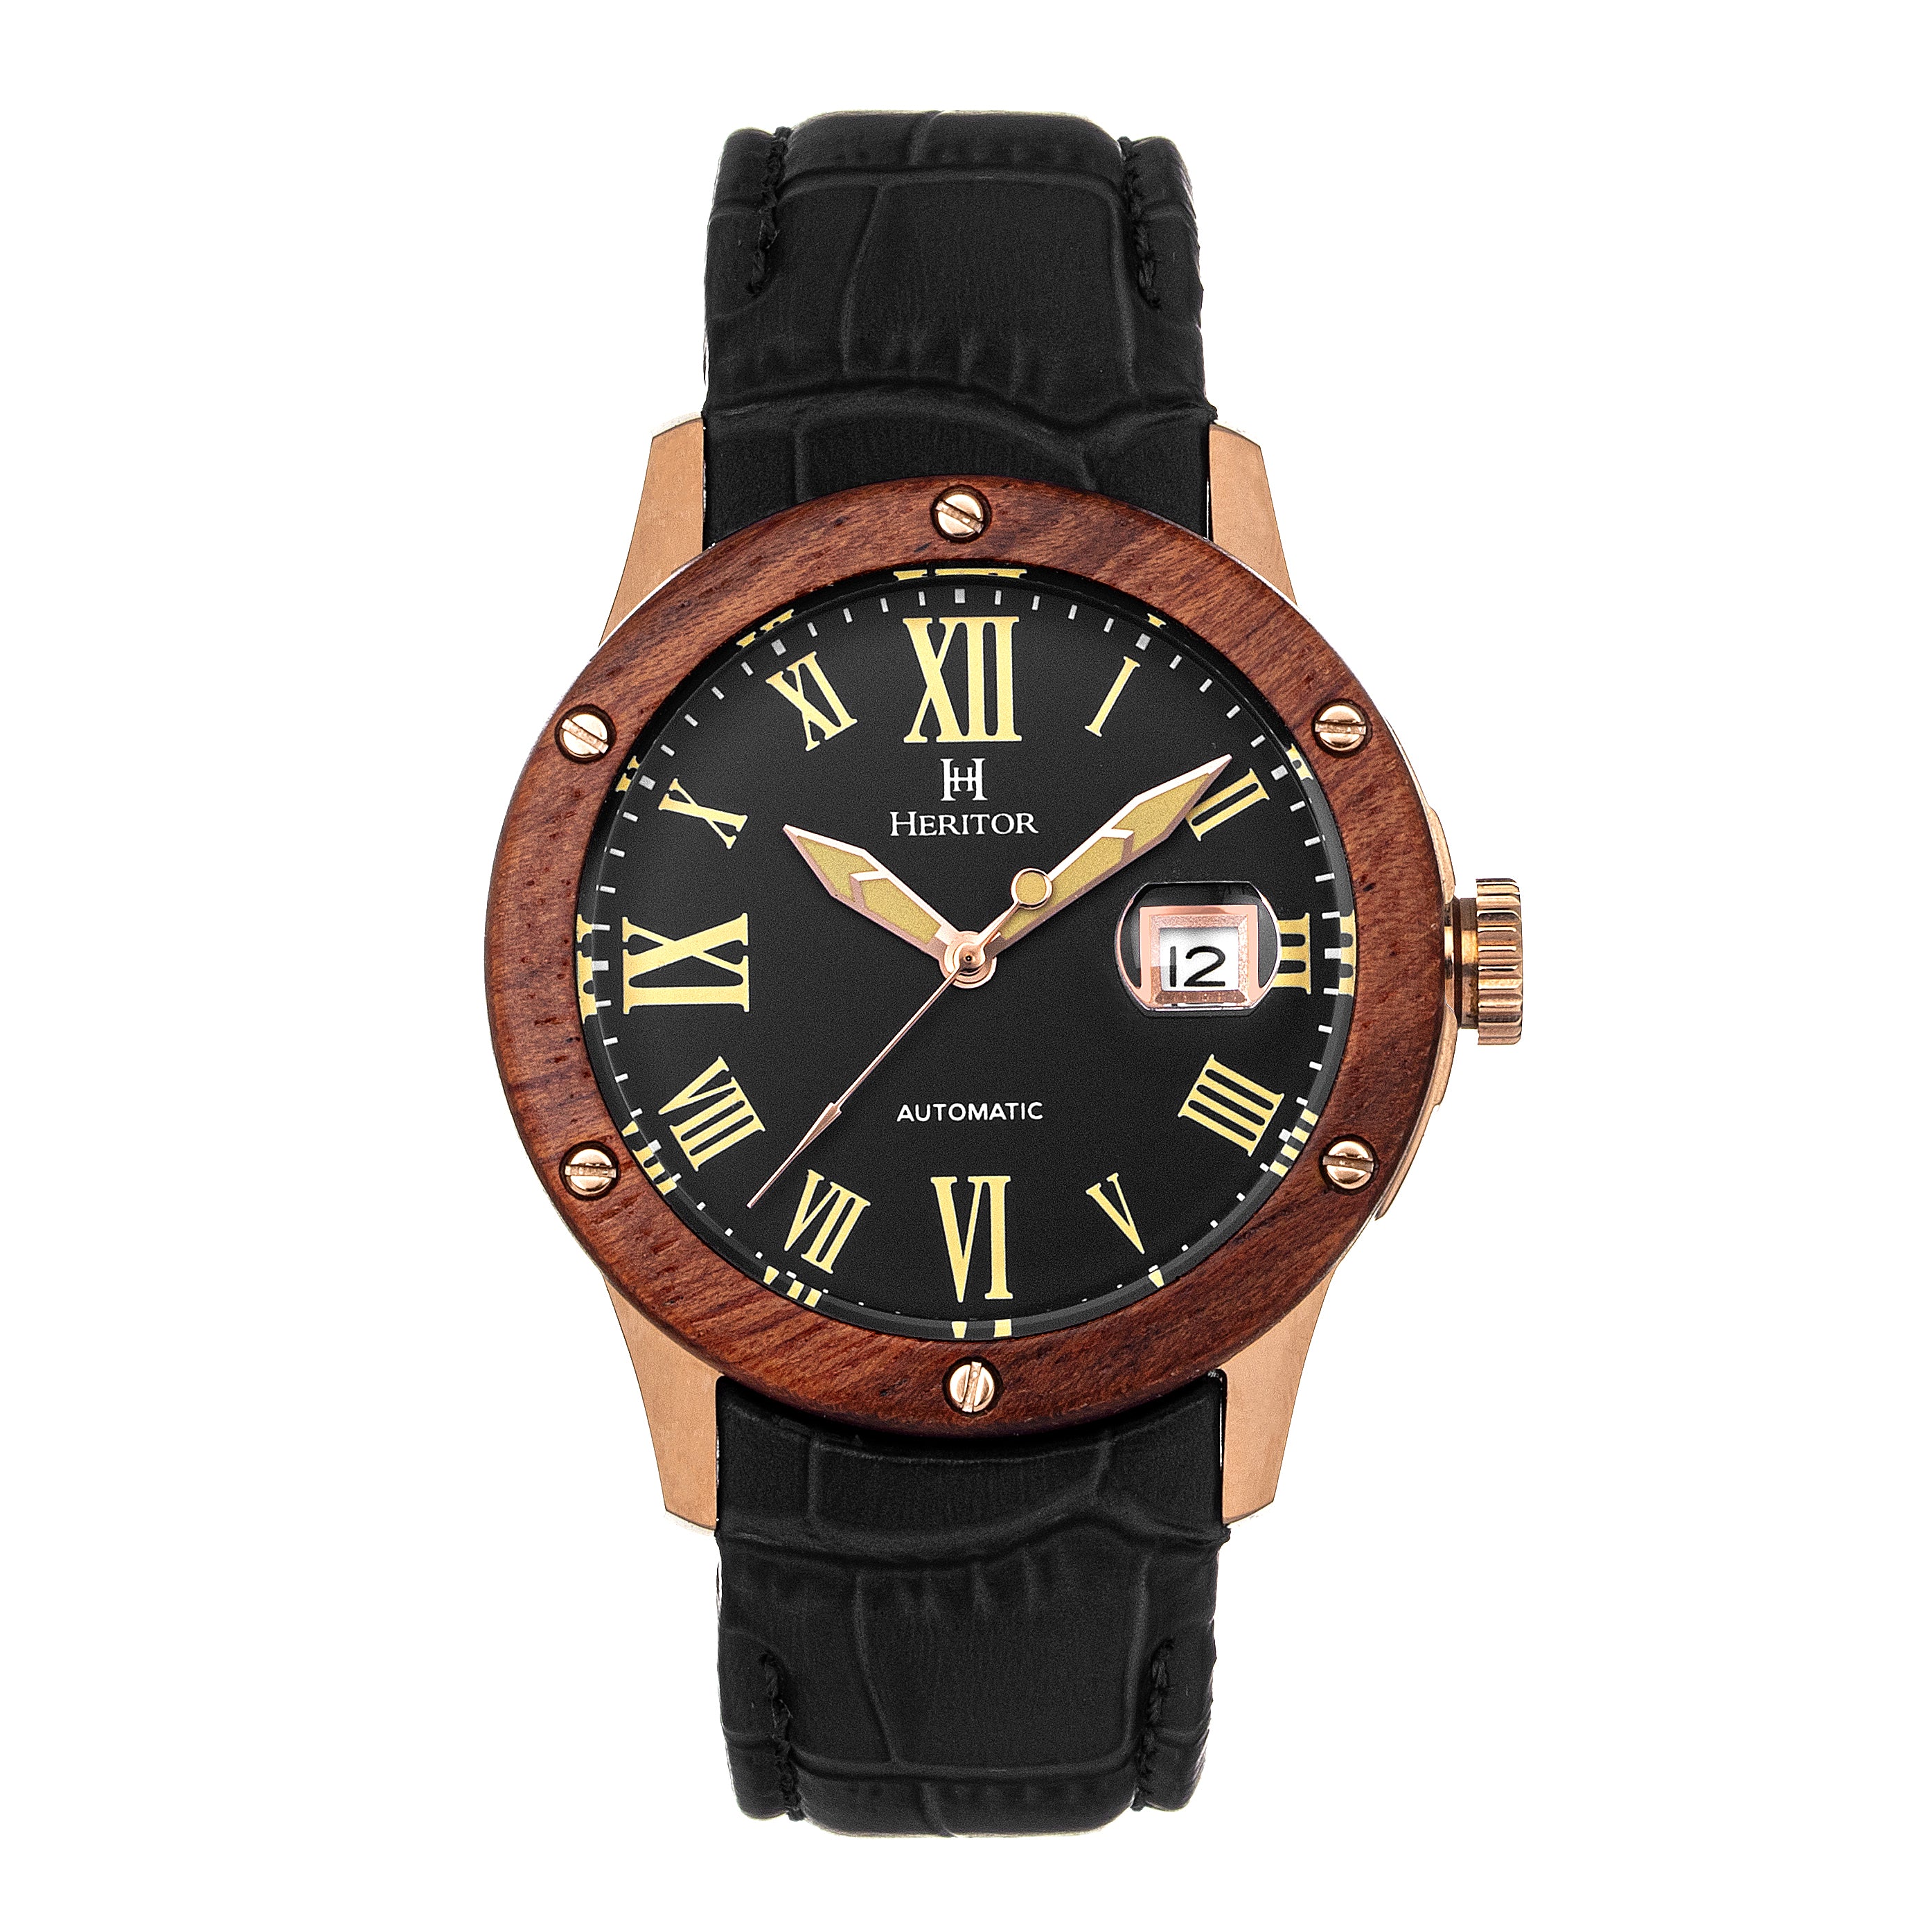 Men’s Black / Rose Gold Everest Wooden-Bezel Leather-Band Watch With Magnified Date - Black, Rose Gold One Size Heritor Automatic